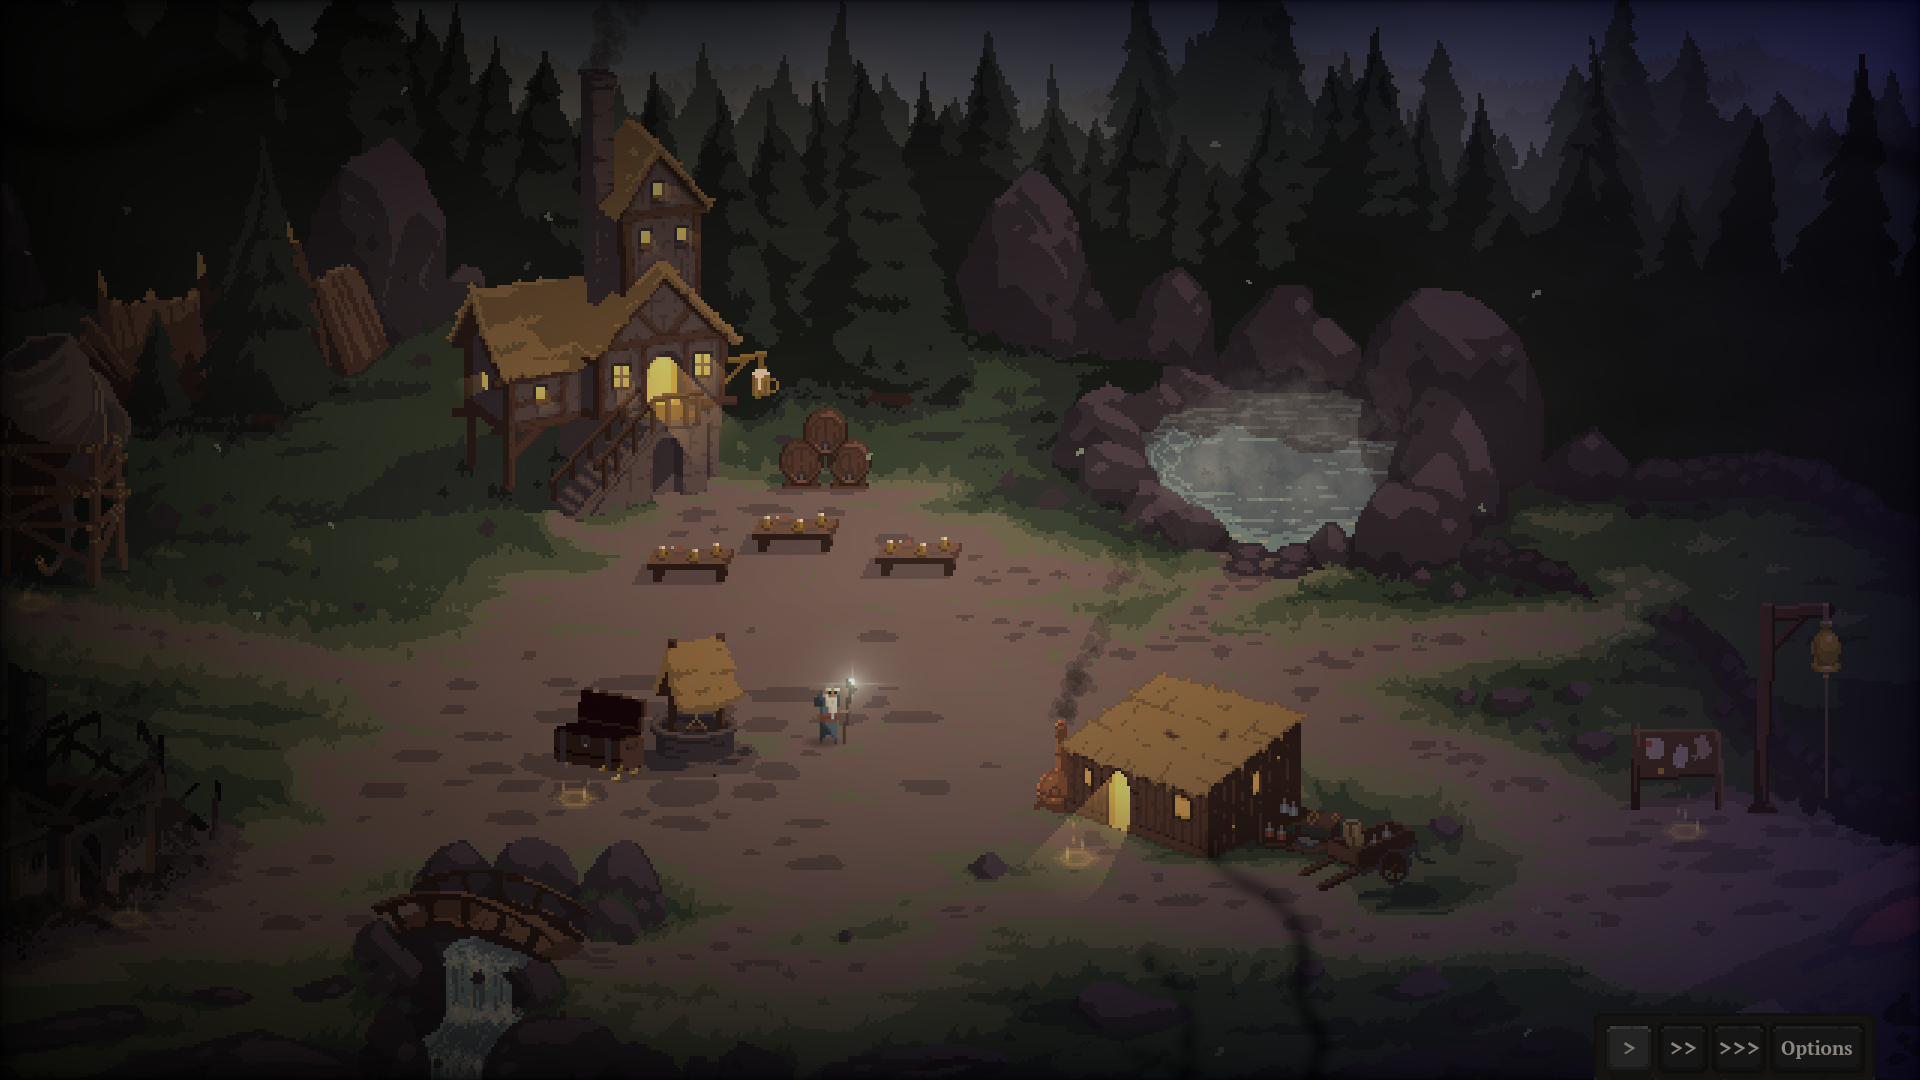 Stay awhile and play this free Diablo-inspired indie as the mayor of Tristram